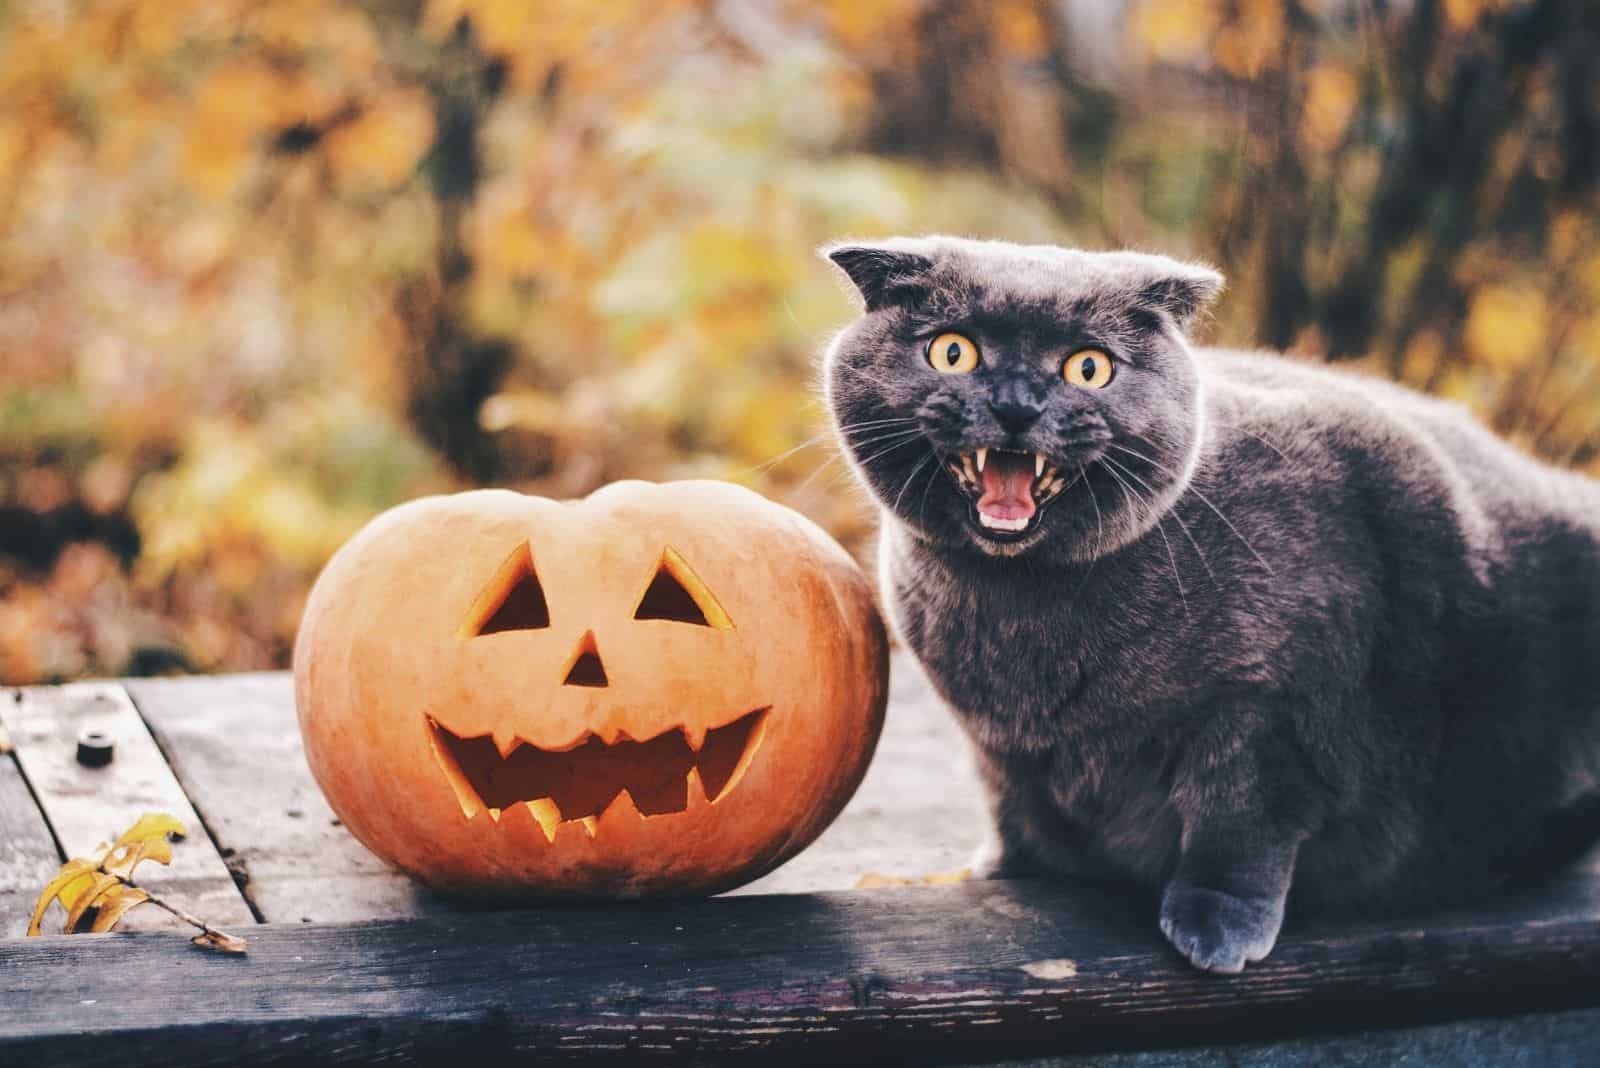 cat and carved pumpkin